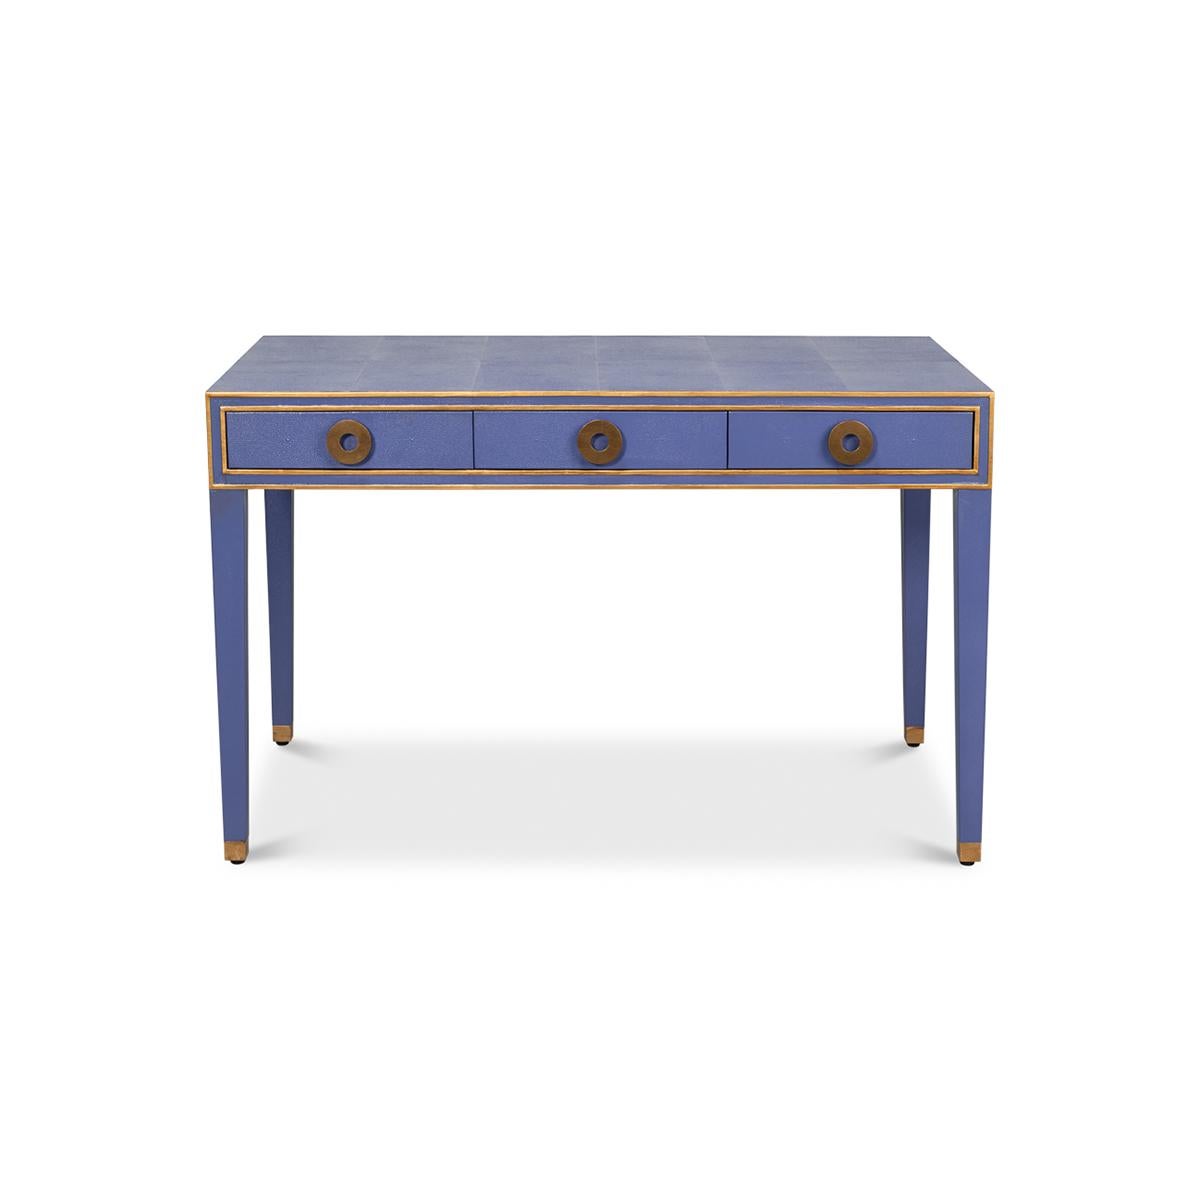 A French Art Deco style shagreen embossed leather desk in a rich cobalt marlin blue. With gilded highlight trim, three frieze drawers with modern round pulls, and raised on square tapered legs.

Dimensions: 48